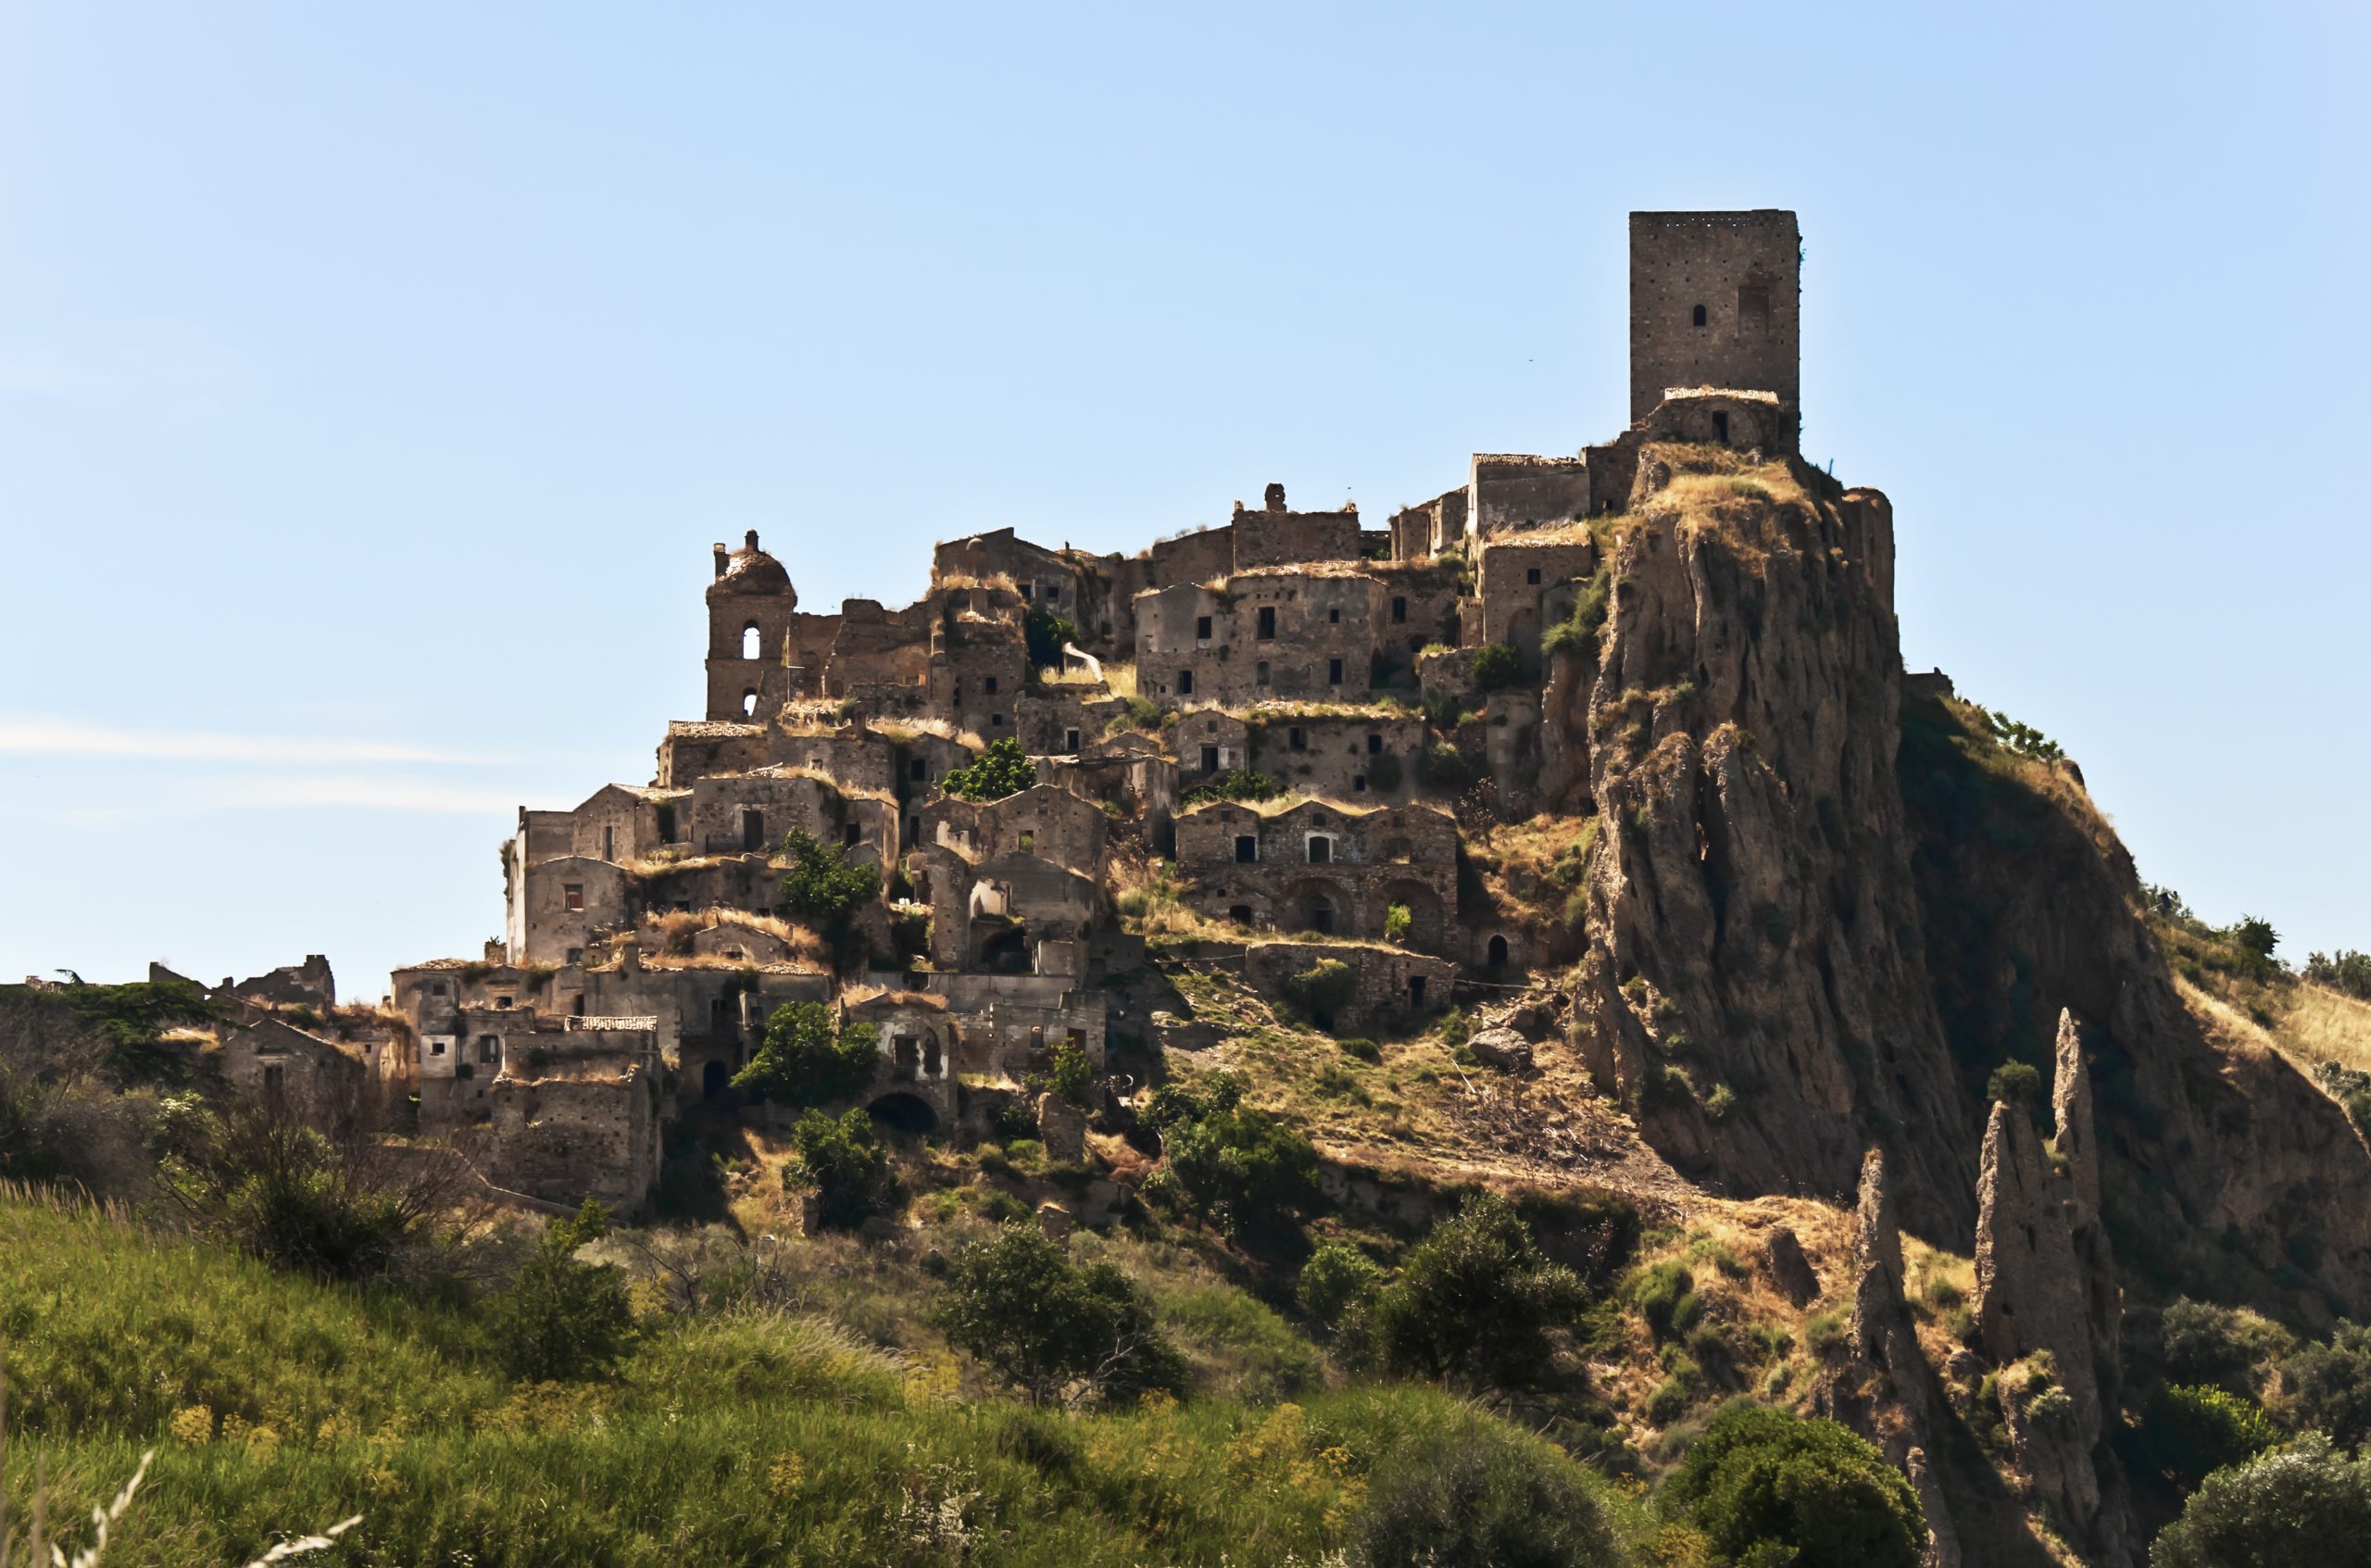 A photograph of Craco. YAYIMAGES.